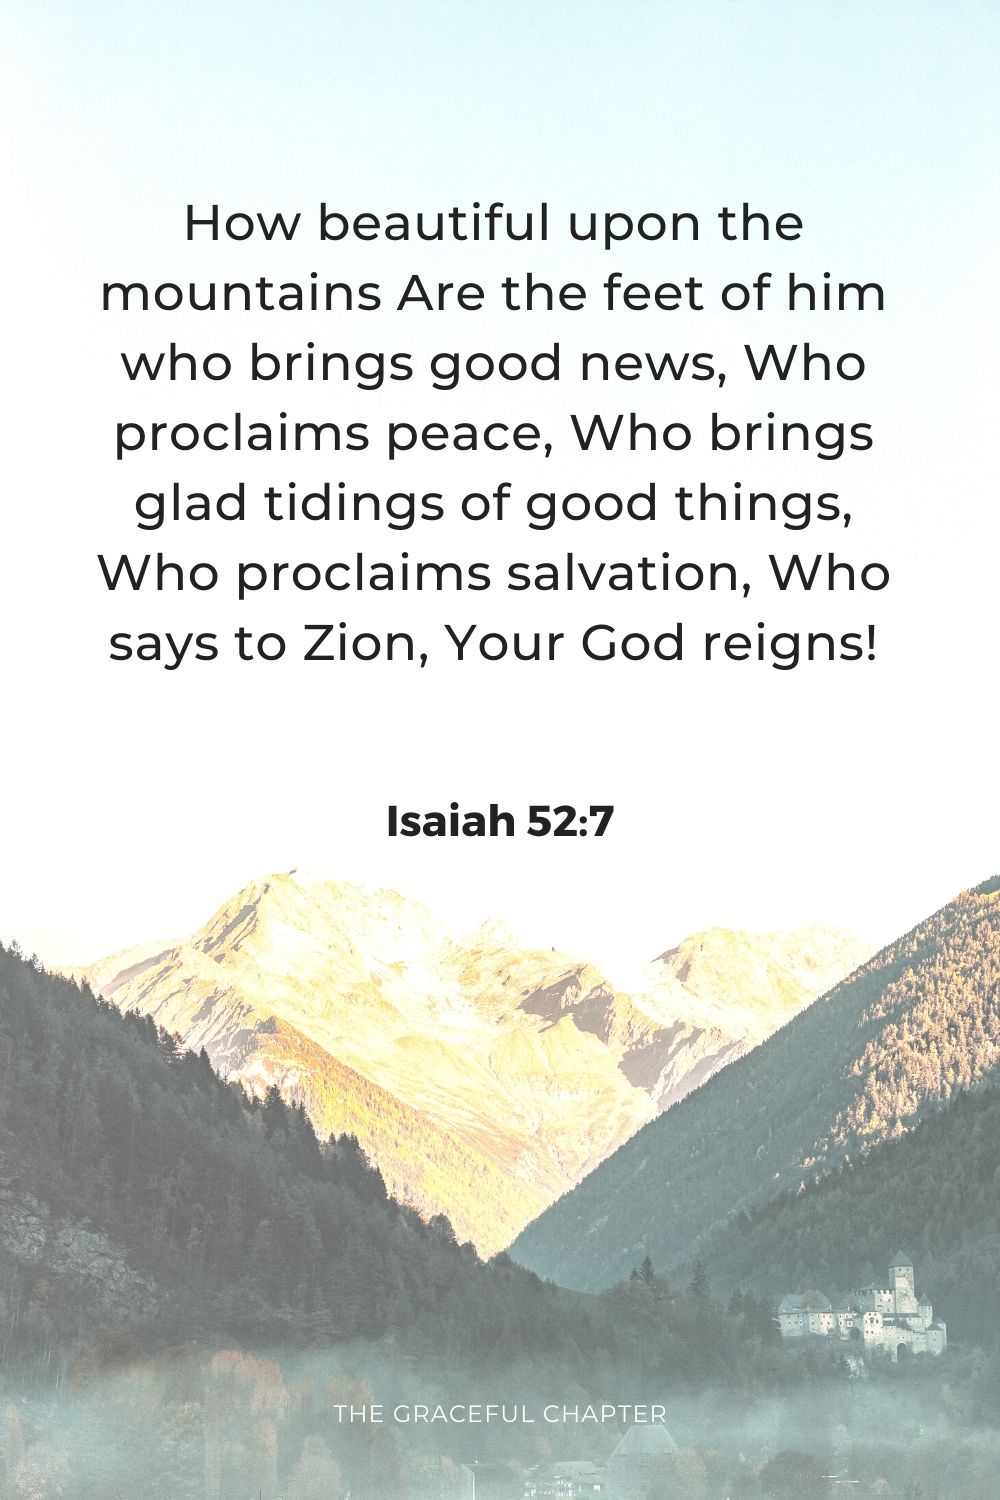 How beautiful upon the mountains Are the feet of him who brings good news, Who proclaims peace, Who brings glad tidings of good things, Who proclaims salvation, Who says to Zion, Your God reigns!